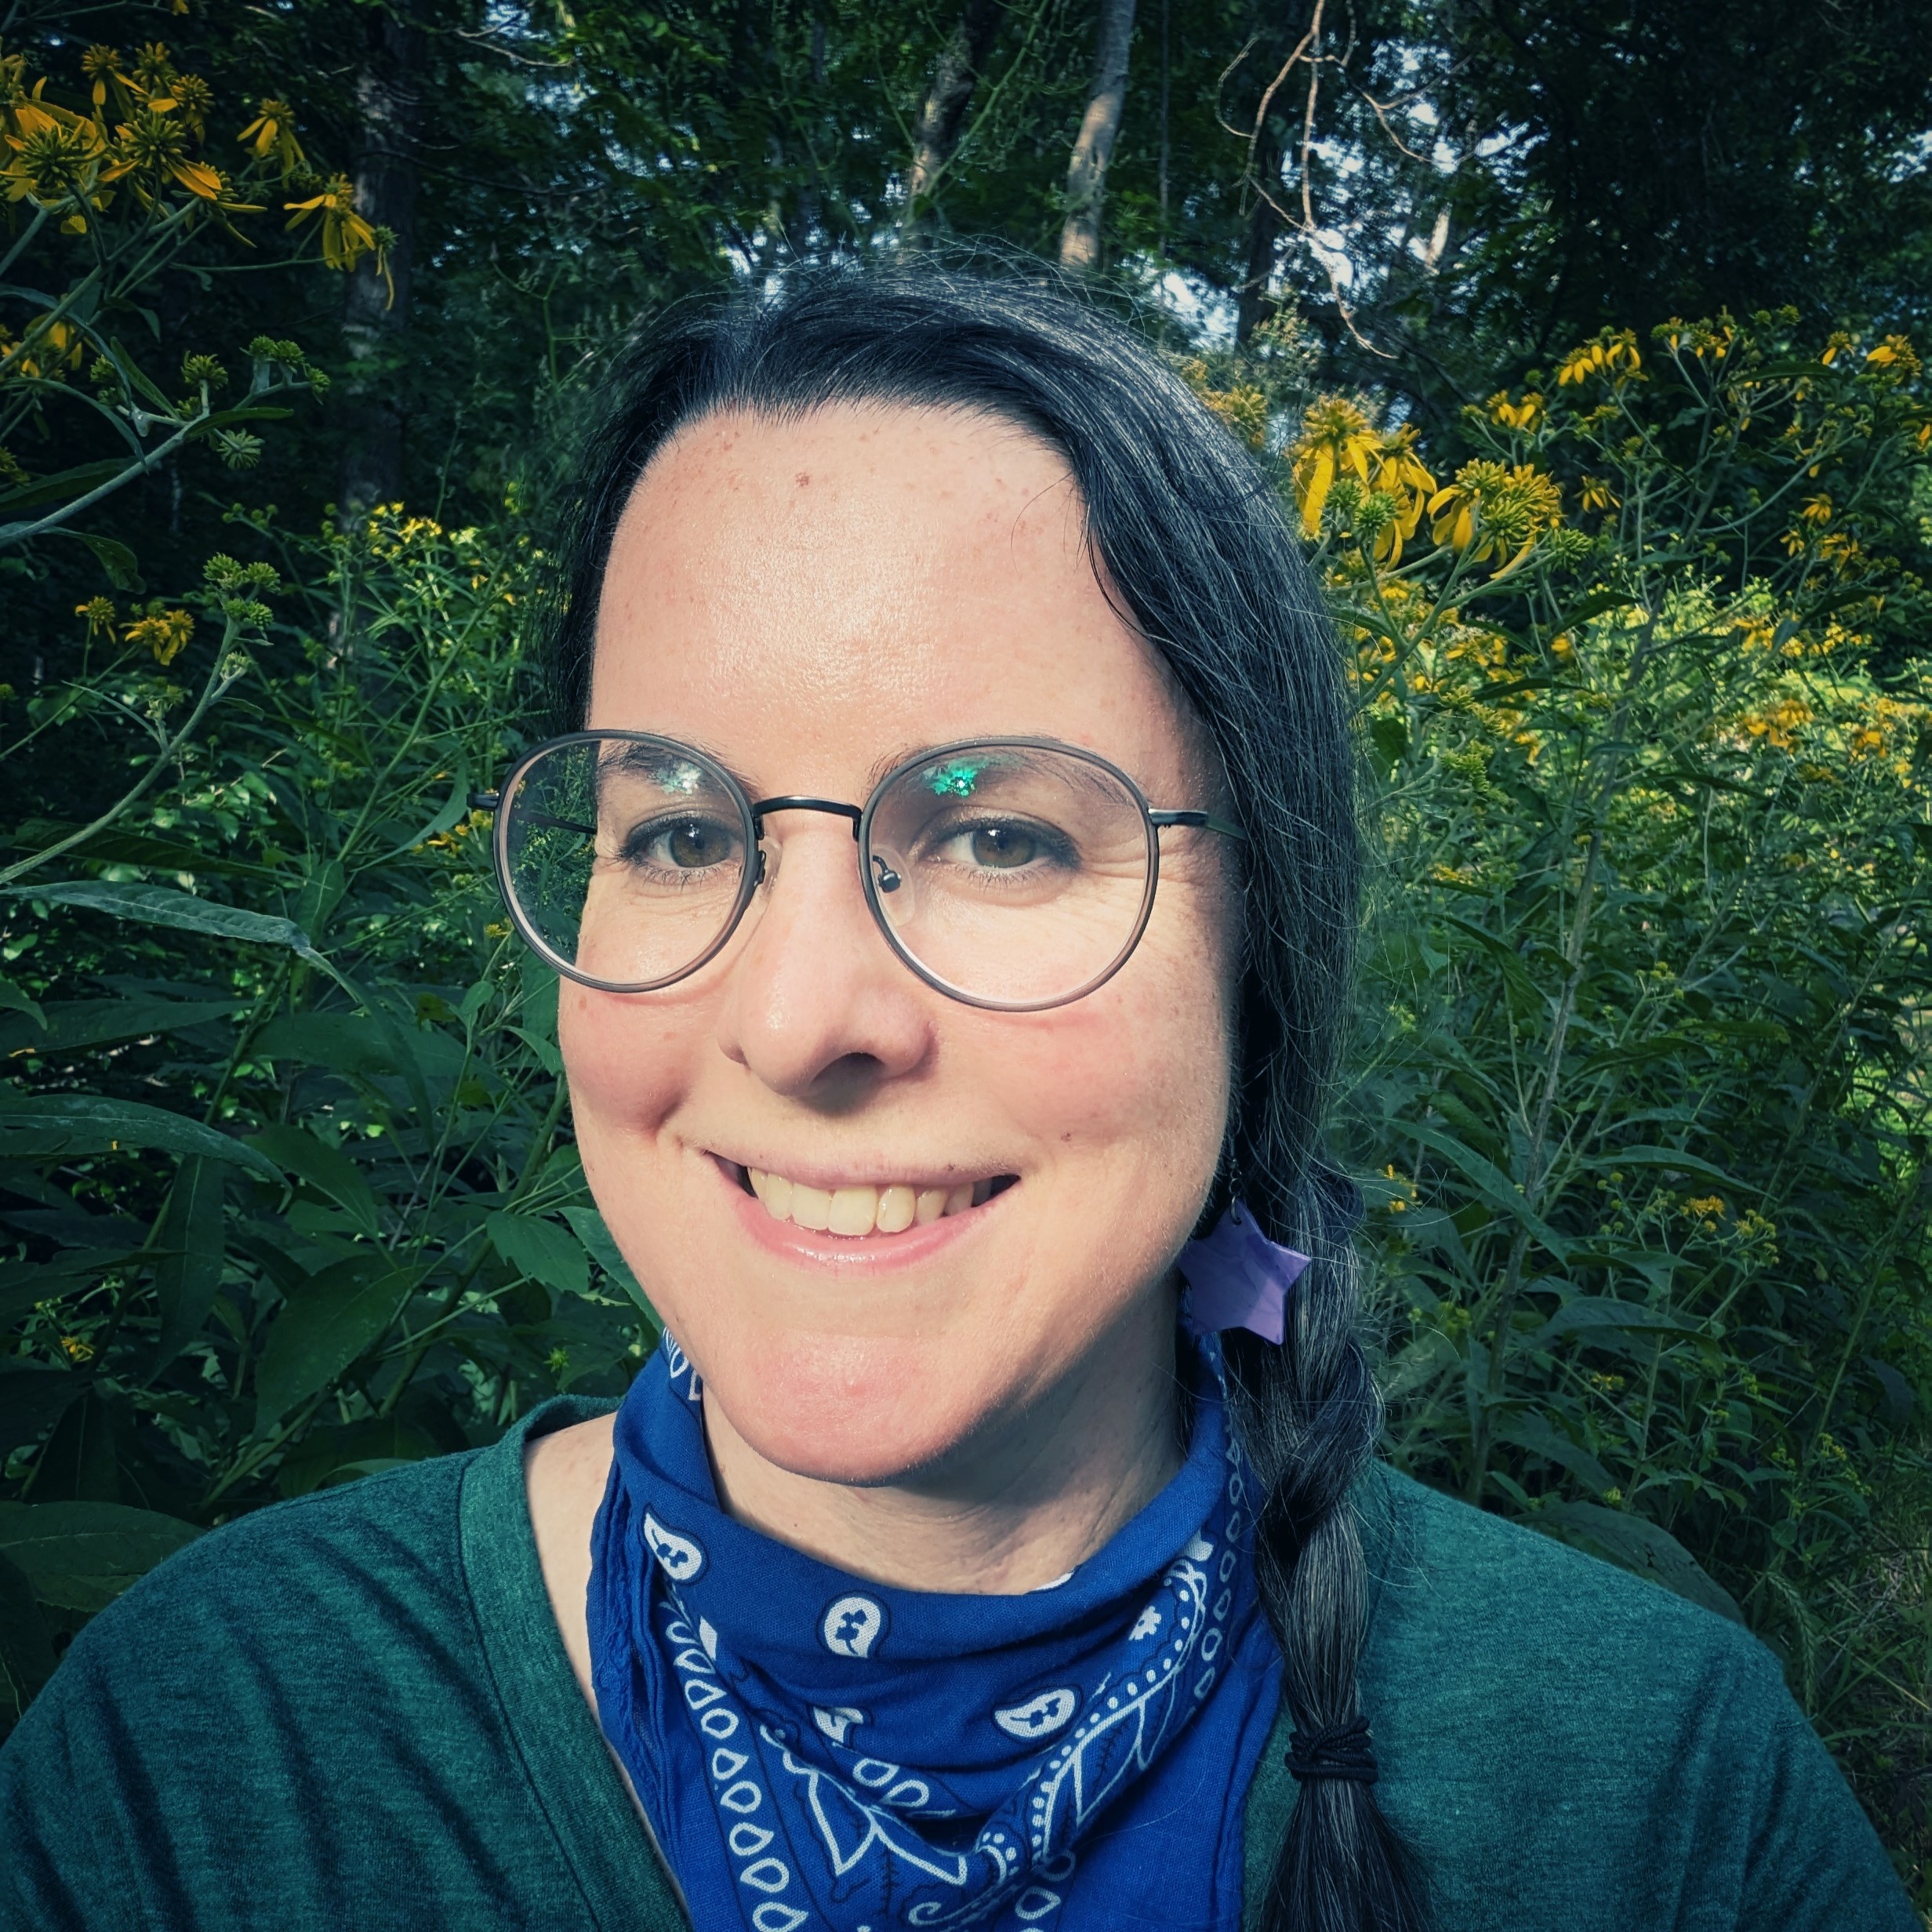 Cassie wearing green, blue, and glasses with a background of forest and yellow flowers